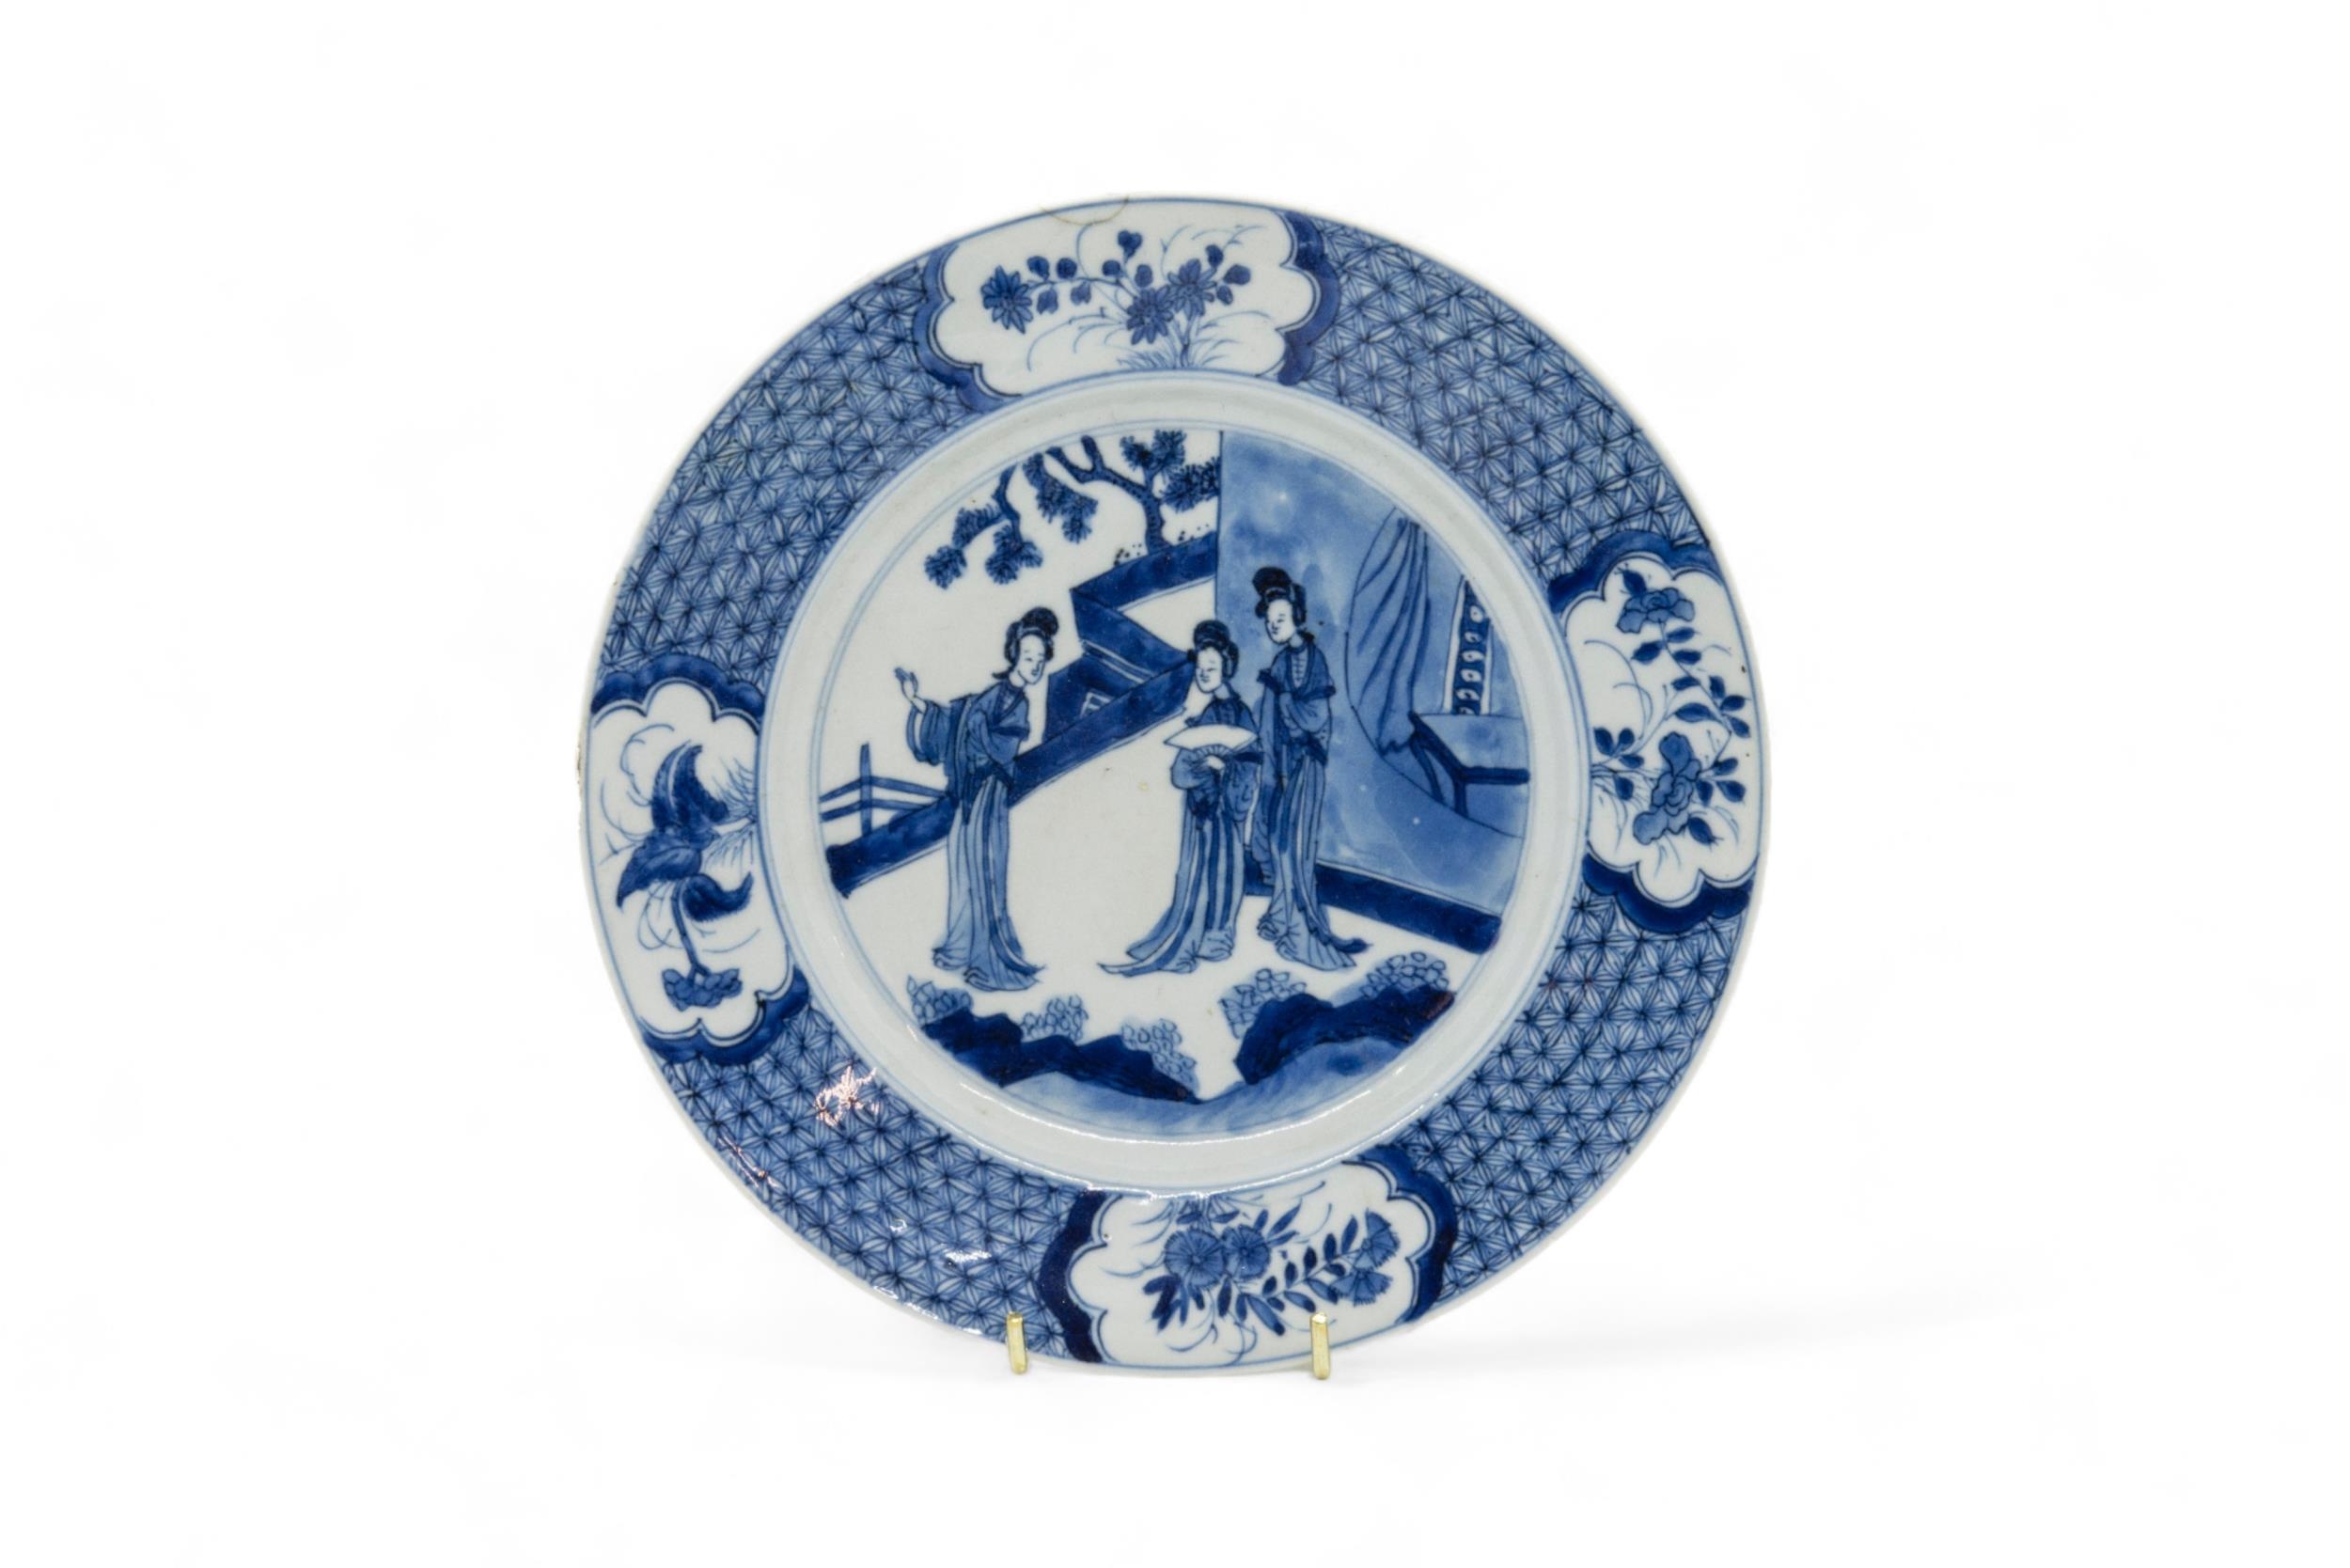 A CHINESE BLUE AND WHITE DISH KANGXI PERIOD (1662-1722) with an apocryphal Chenghua mark 21.5cm diam